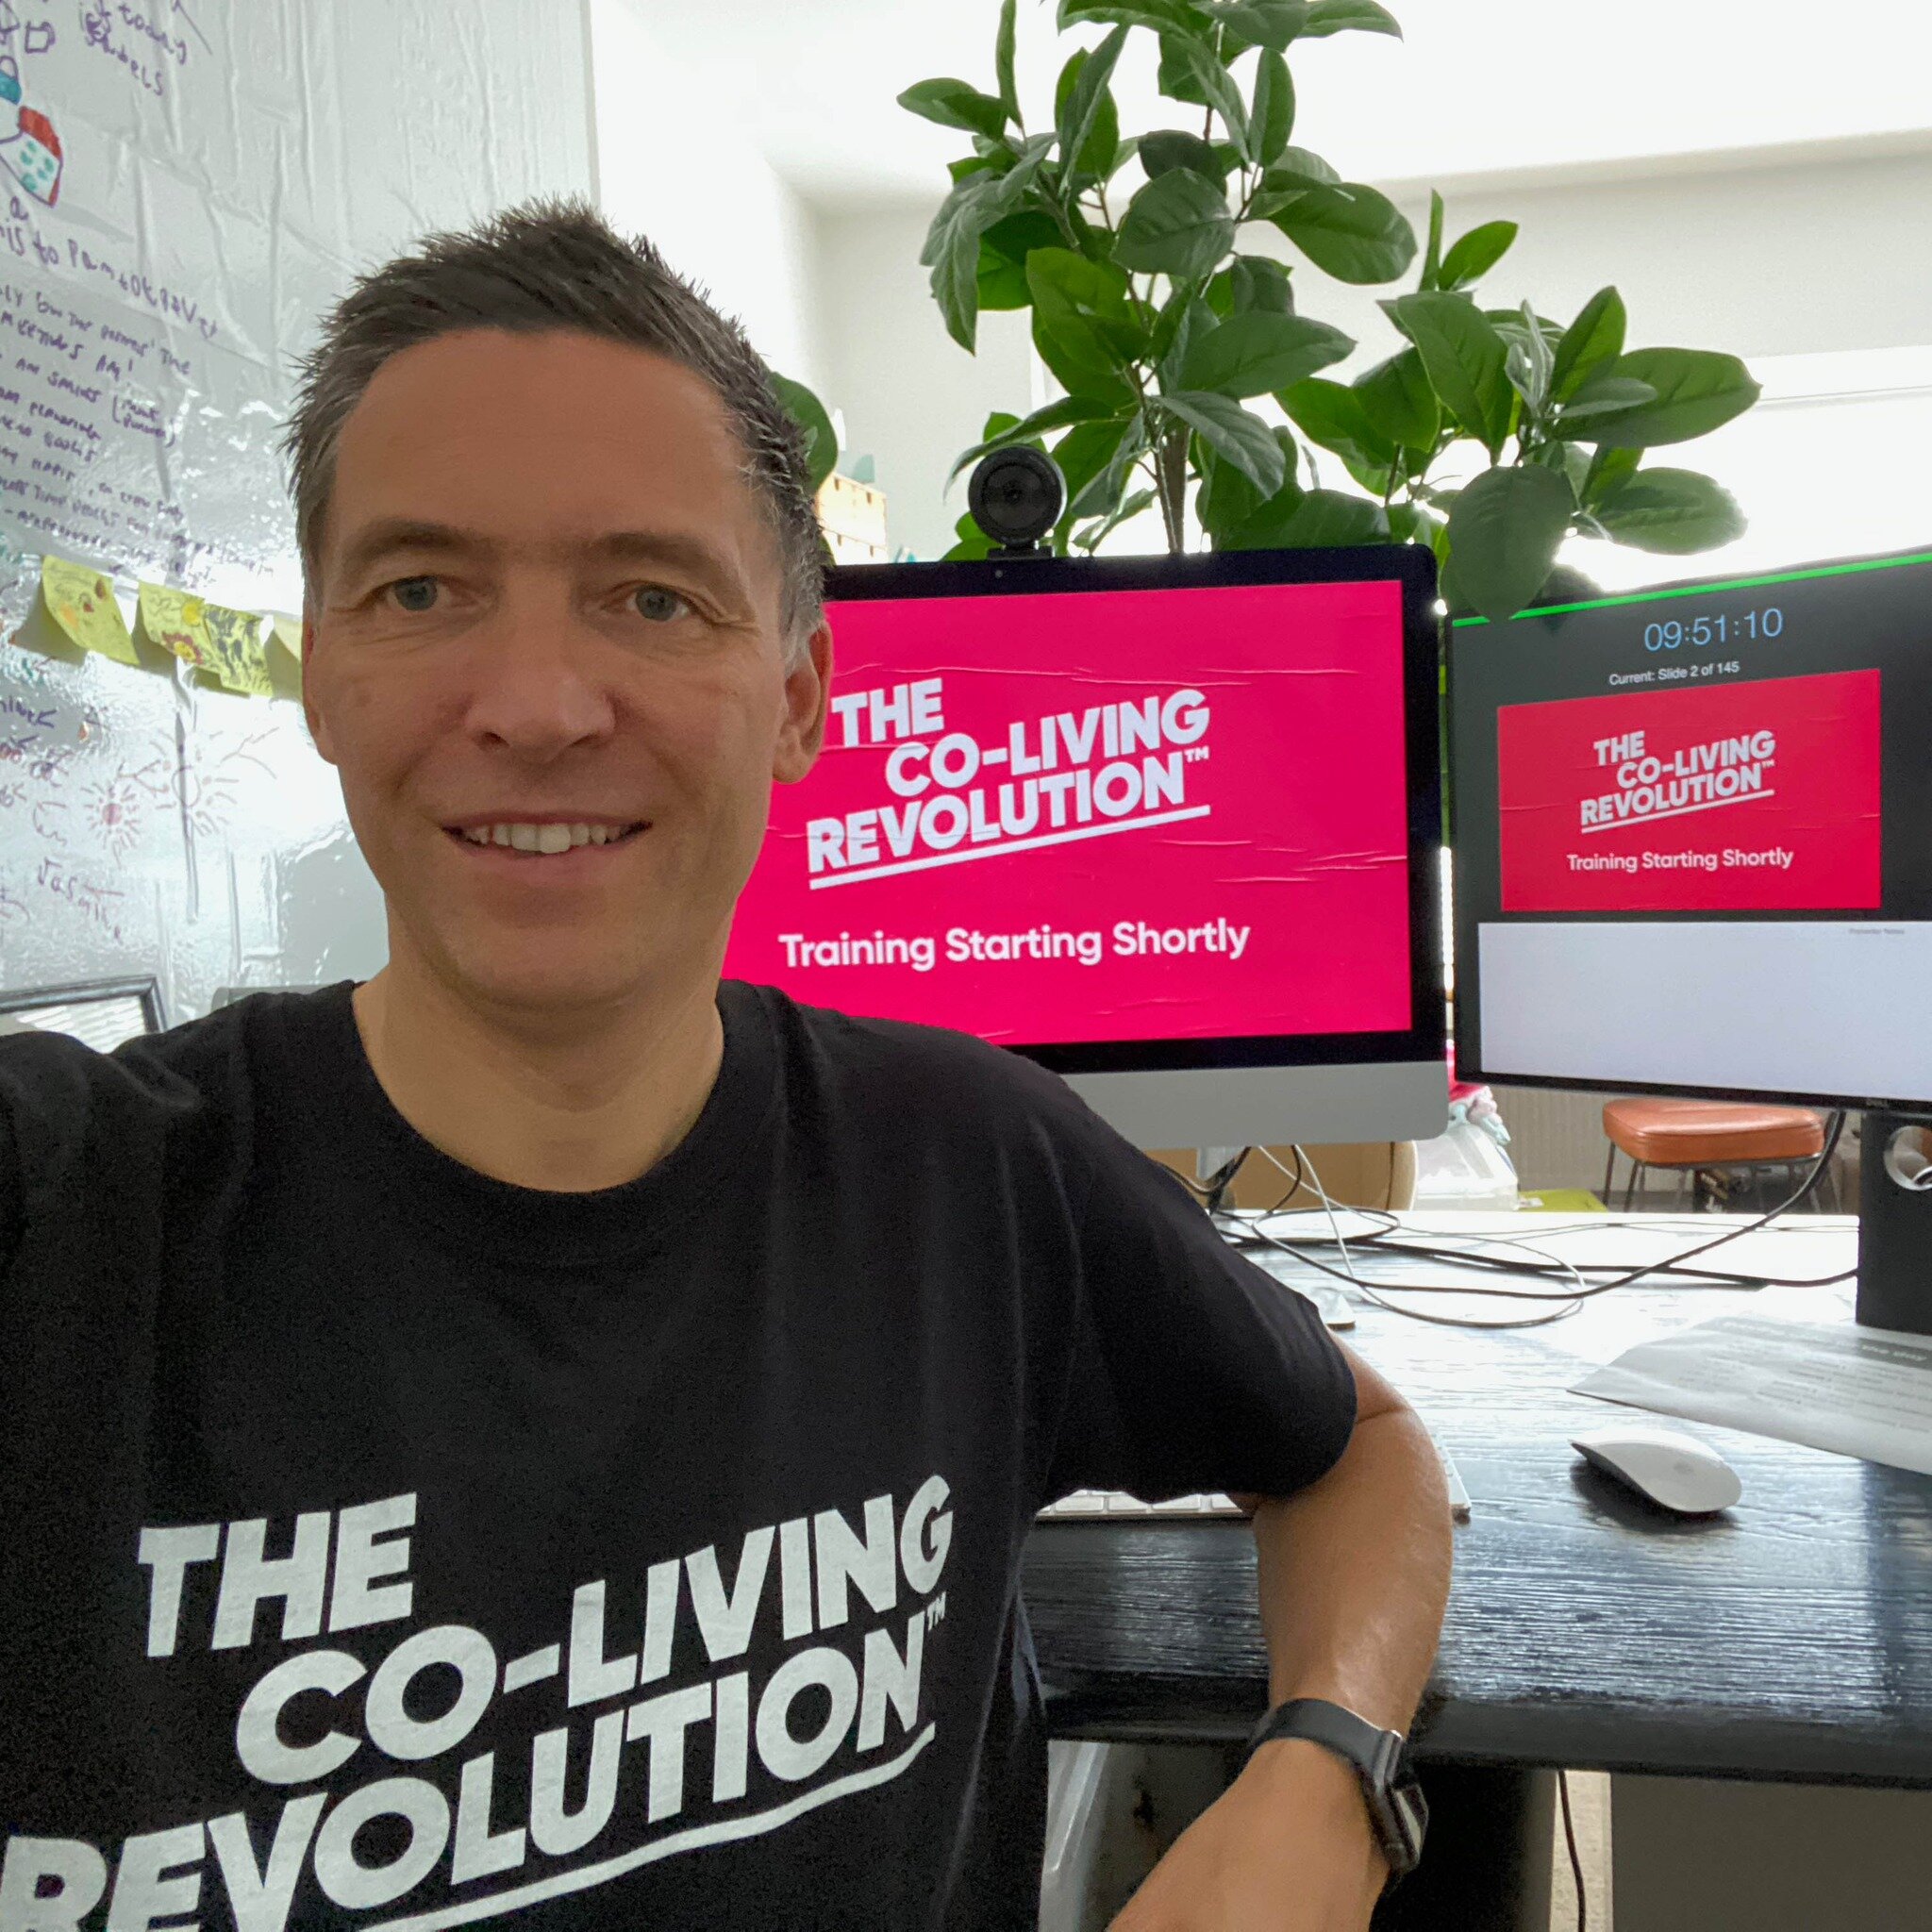 Fantastic turn out for the Co-Living HMO Discovery Day on Sunday. We had over 50 attendees learning how convert residential and commercial buildings into design-led HMOs!

www.theco-livingrevolution.co.uk
.
.
.
.
#colivingrevolution #thecolivingrevol